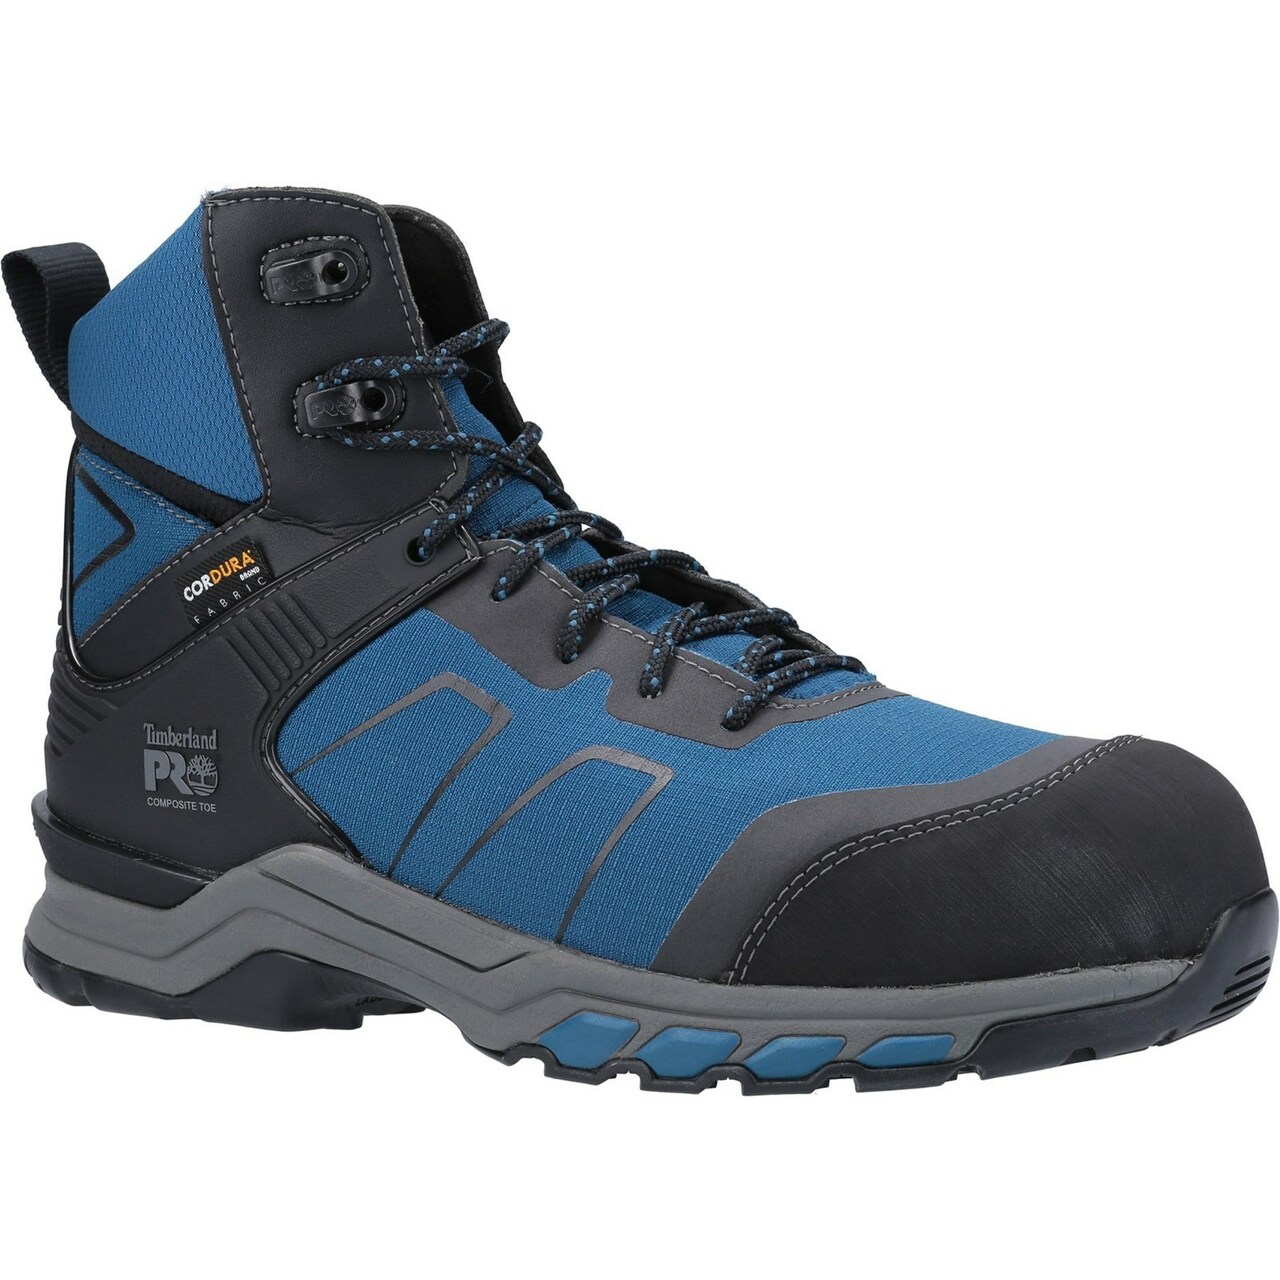 Hypercharge Composite Safety Toe Work Boot - Teal/Black